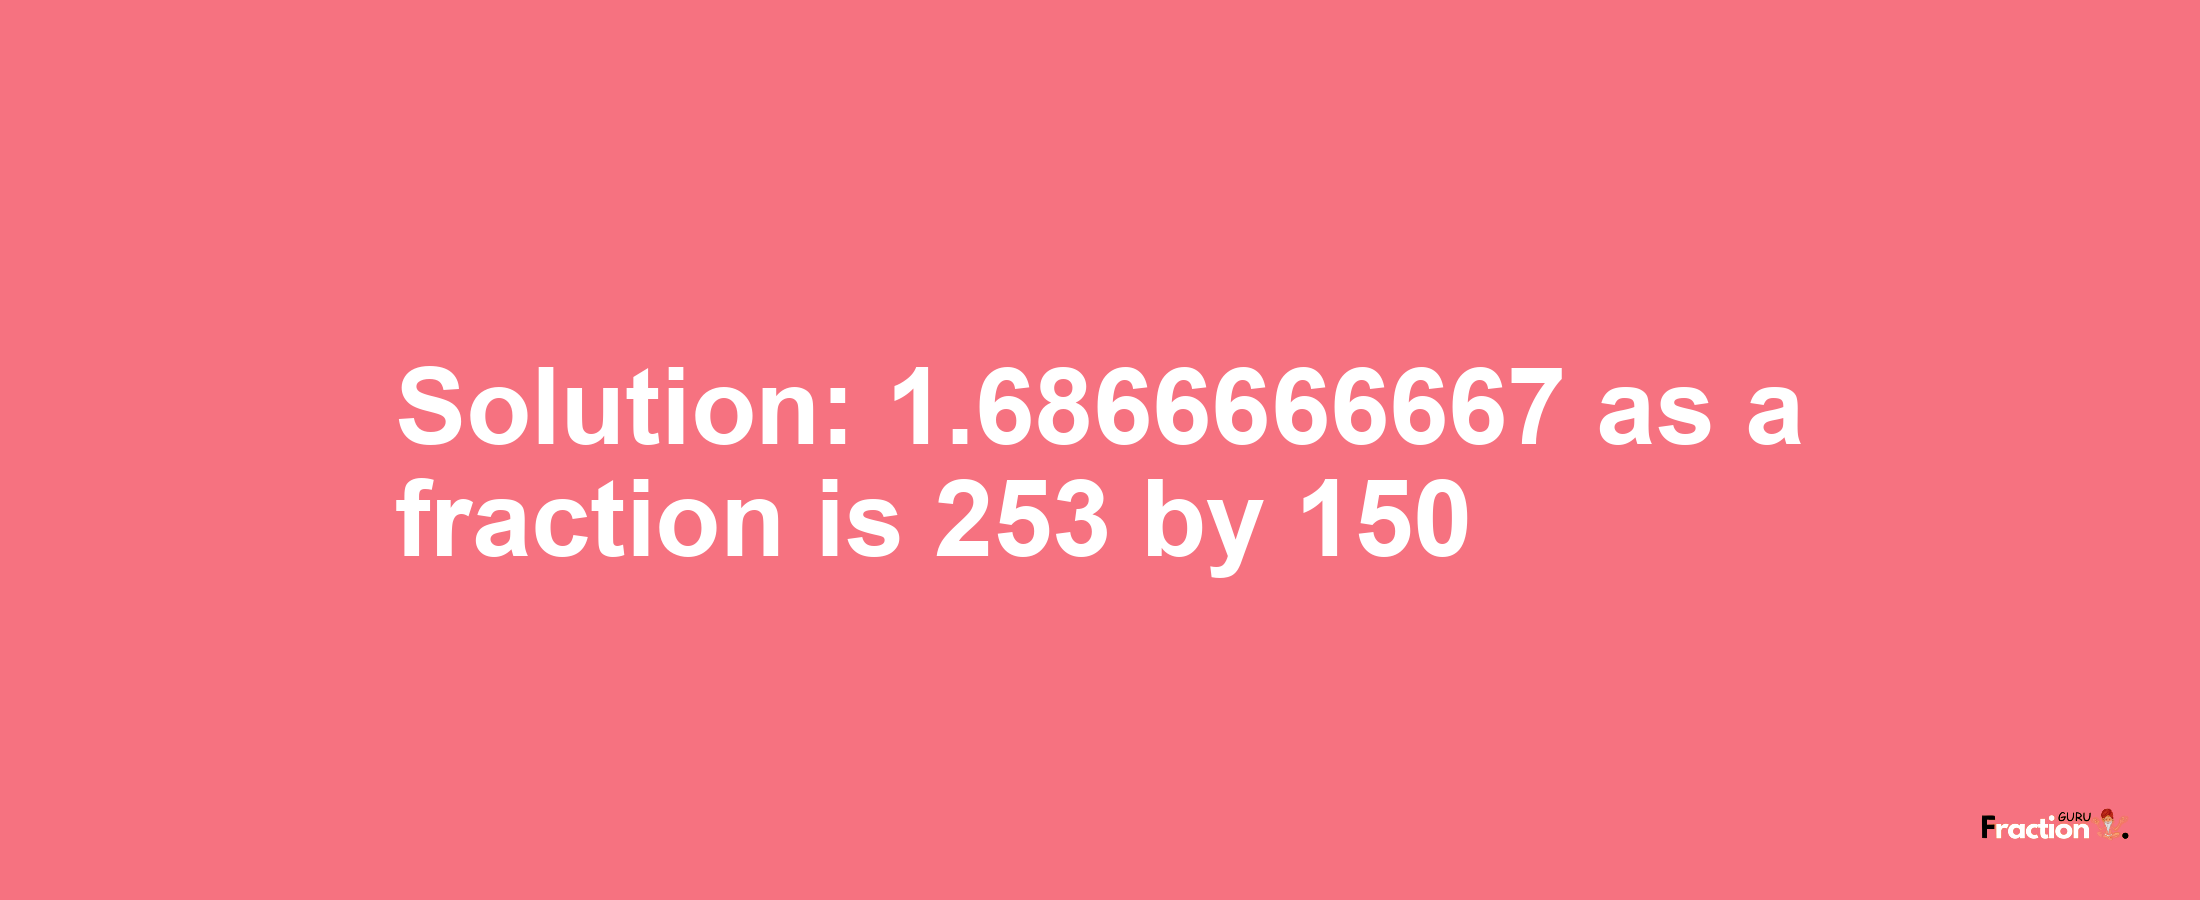 Solution:1.6866666667 as a fraction is 253/150